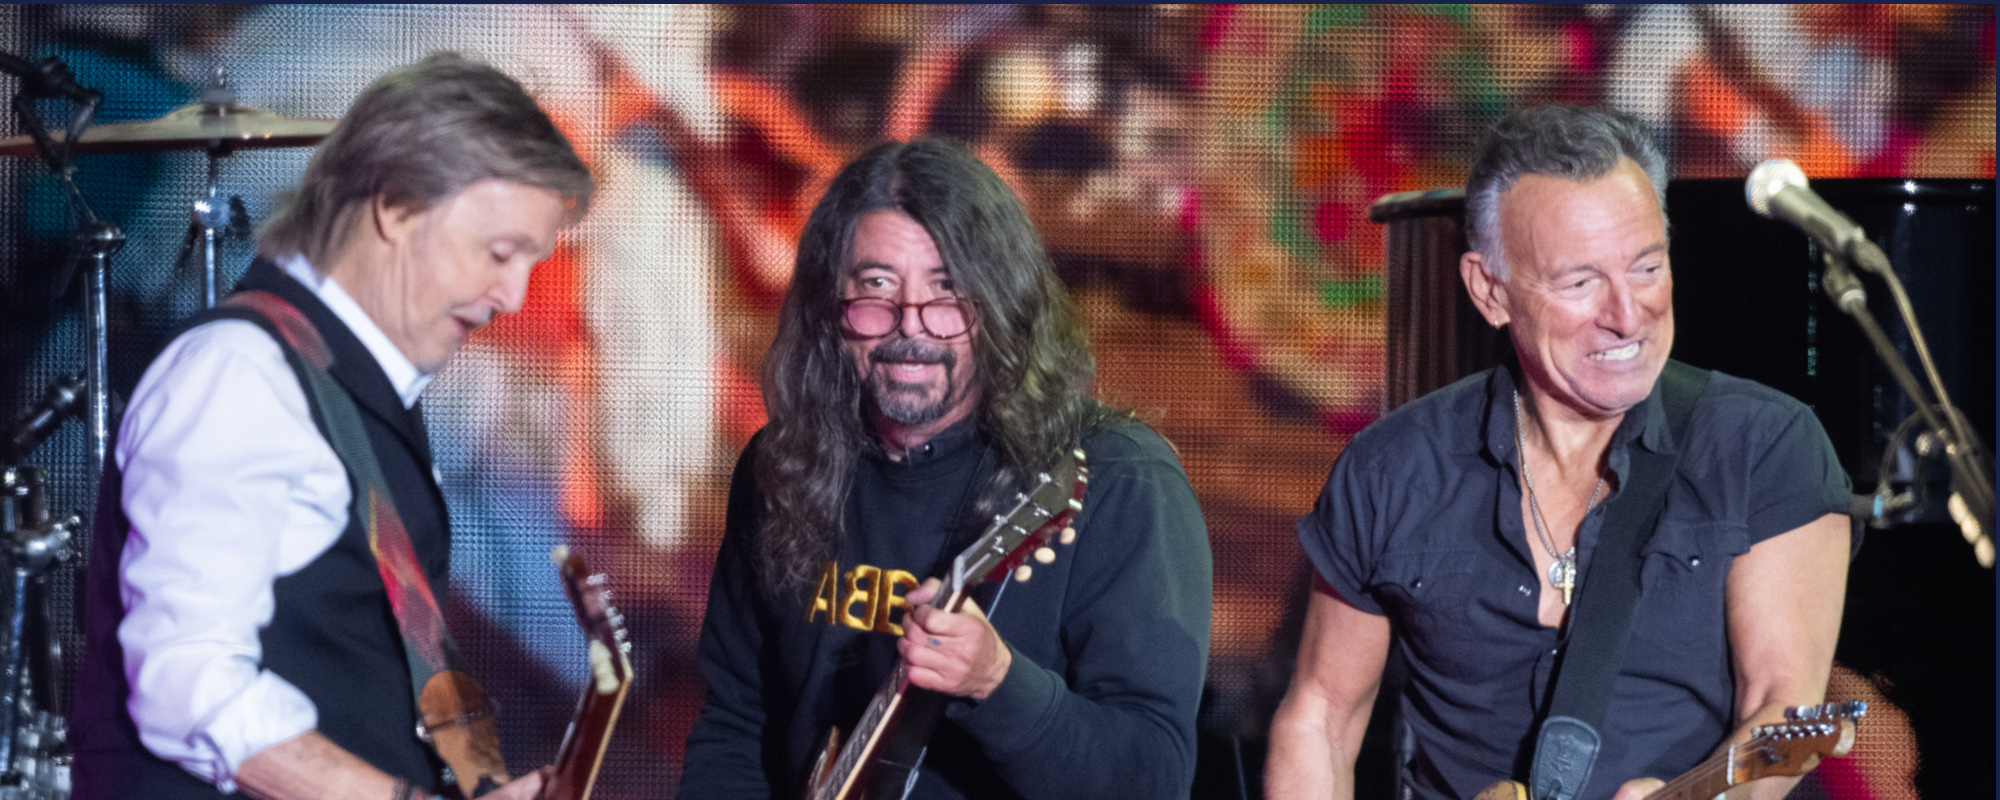 Dave Grohl Performs “Marigold” for First Time in 12 Years